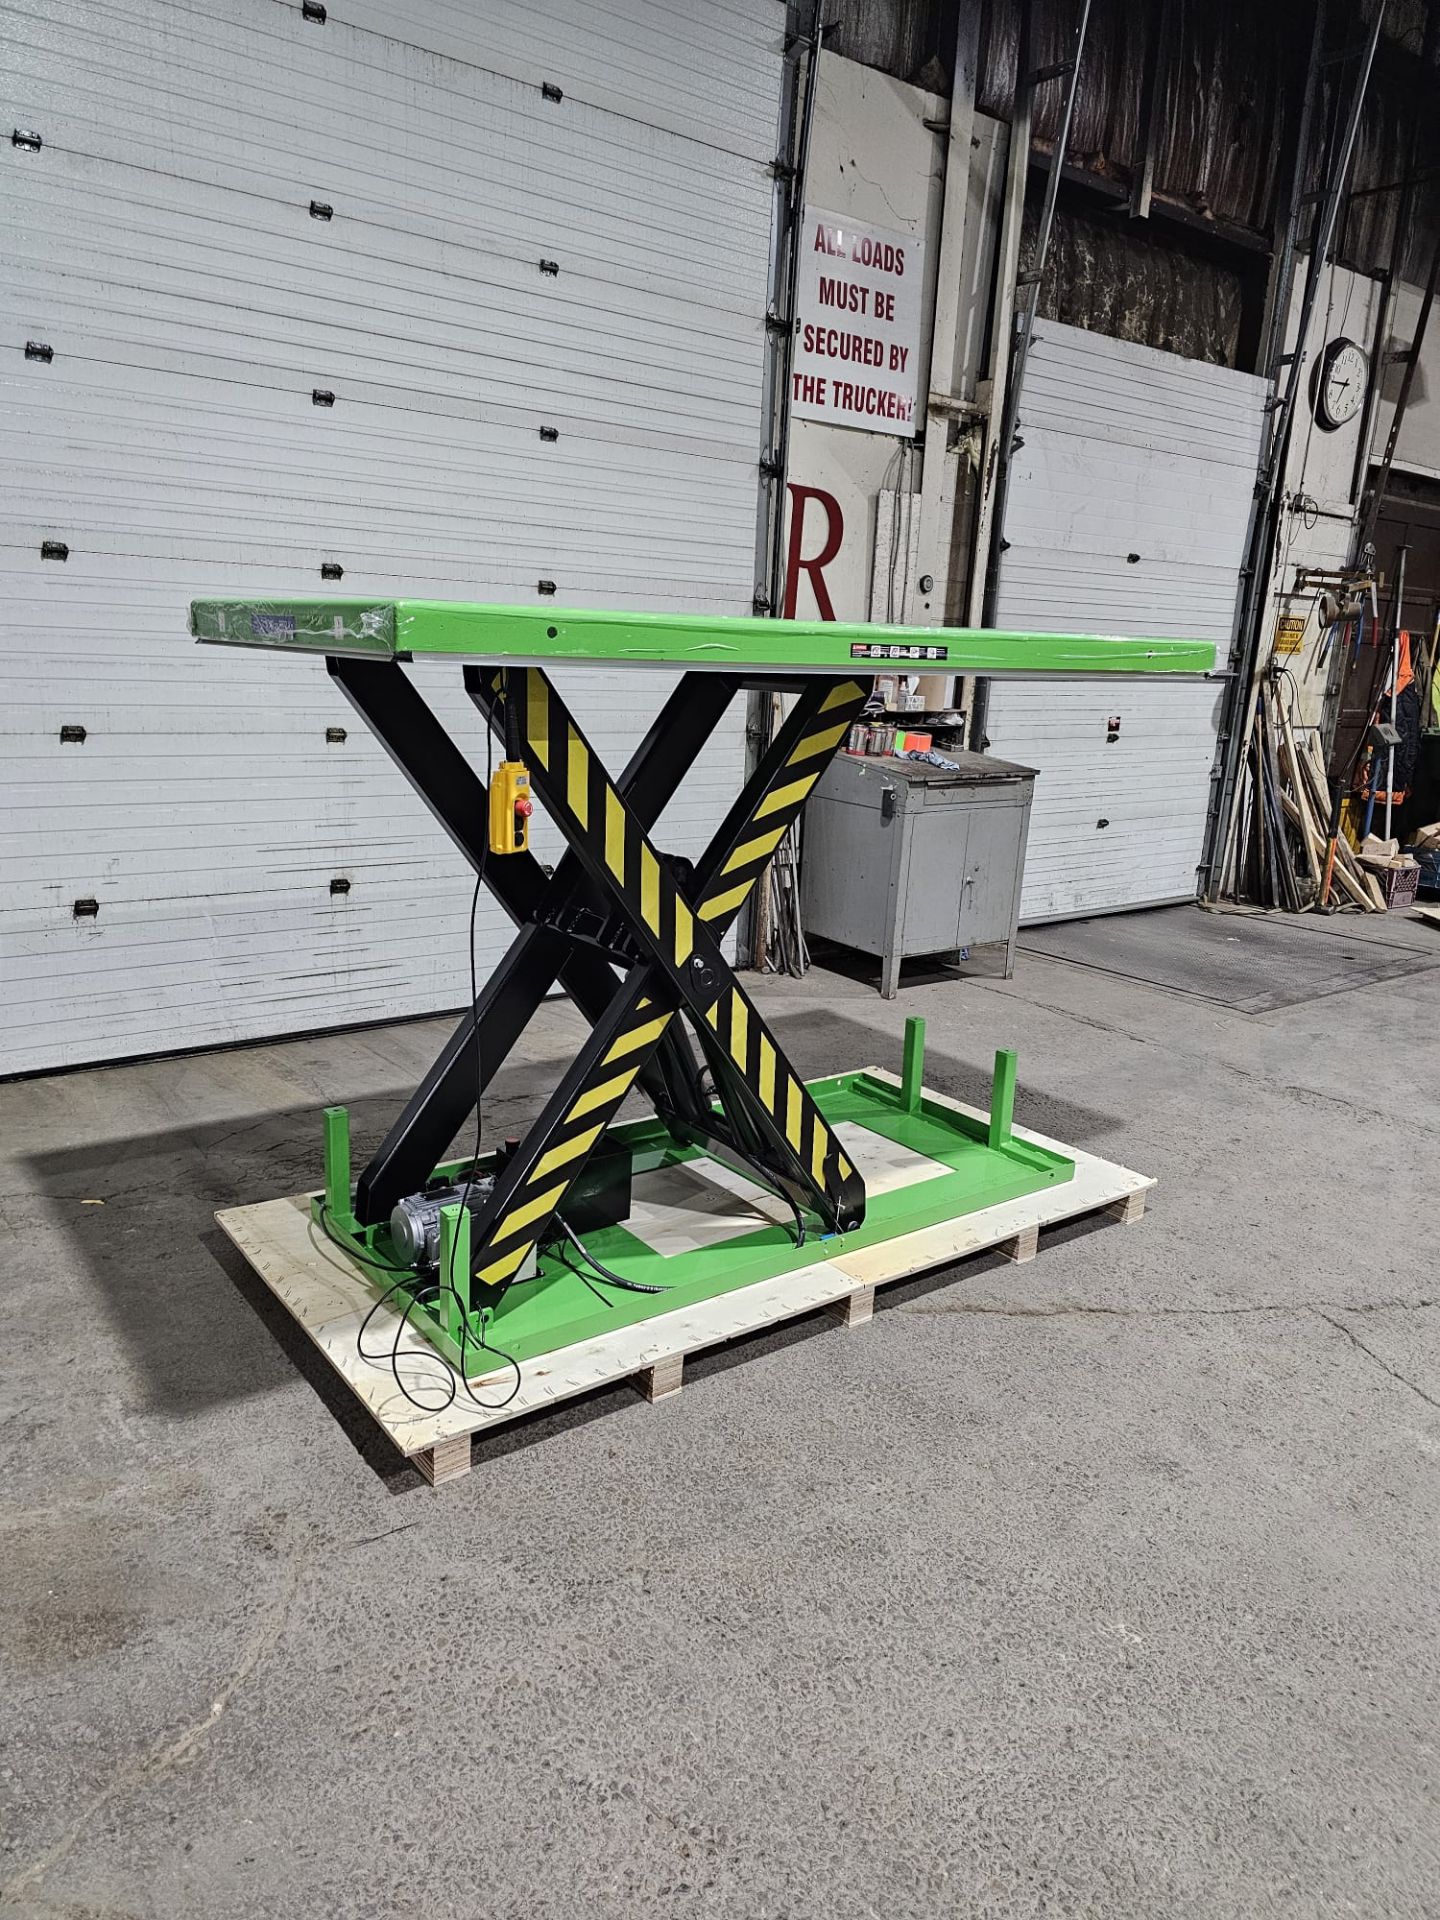 HW Hydraulic Lift Table 94" x 47" x 64" lift - 11,000lbs capacity - UNUSED and MINT - 220V - Image 7 of 7